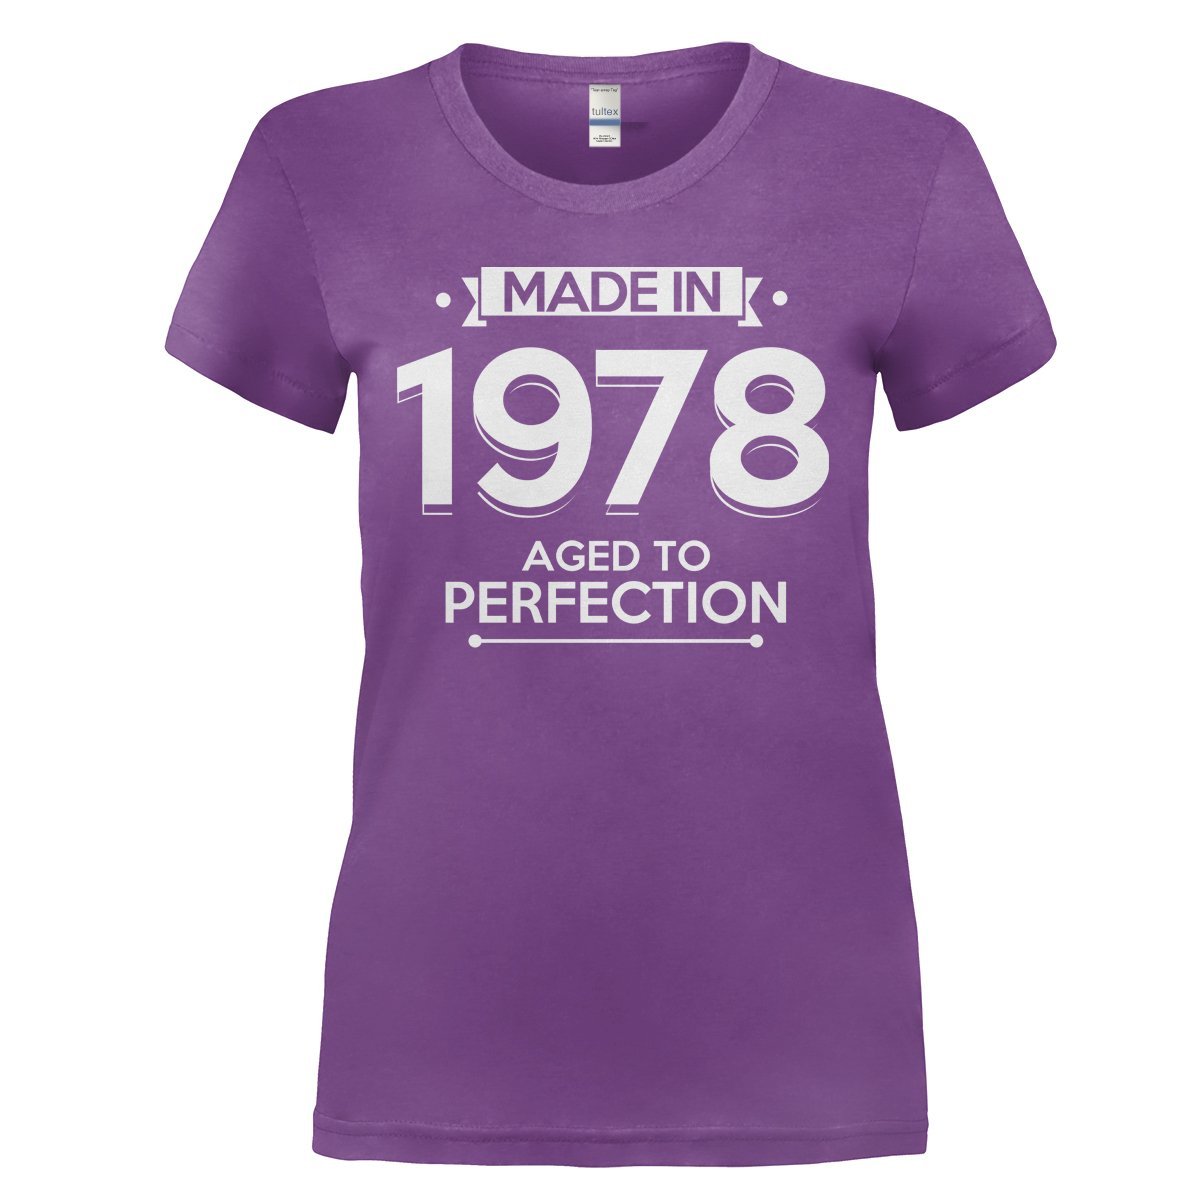 Made in 1978. Aged to Perfection - Age T-Shirts & Hoodies | I Love App ...